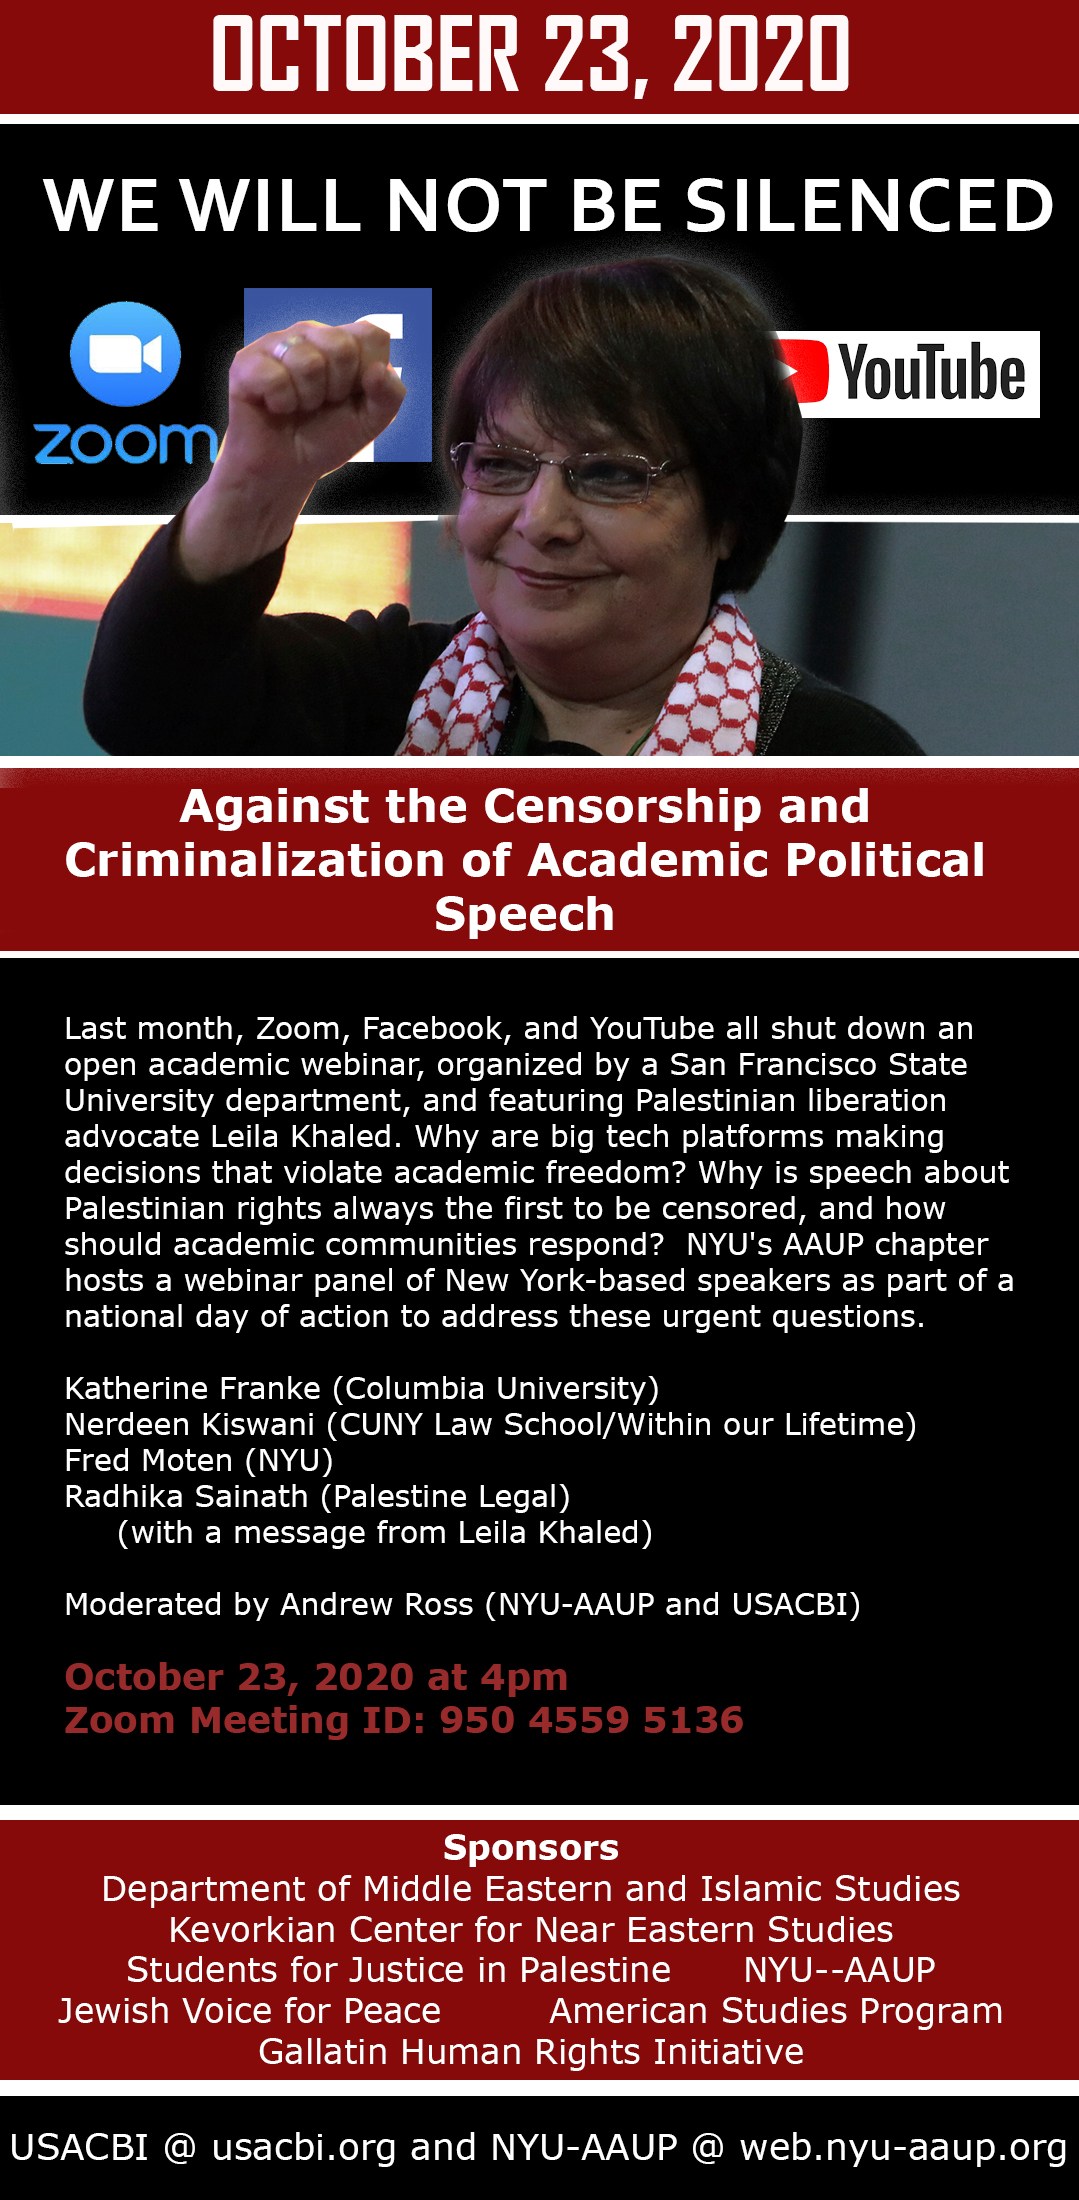 Flyer featuring a photo of Leila Khaled  wearing a keffiyeh with fist raised in the air, with the text "We Will Not Be Silenced."